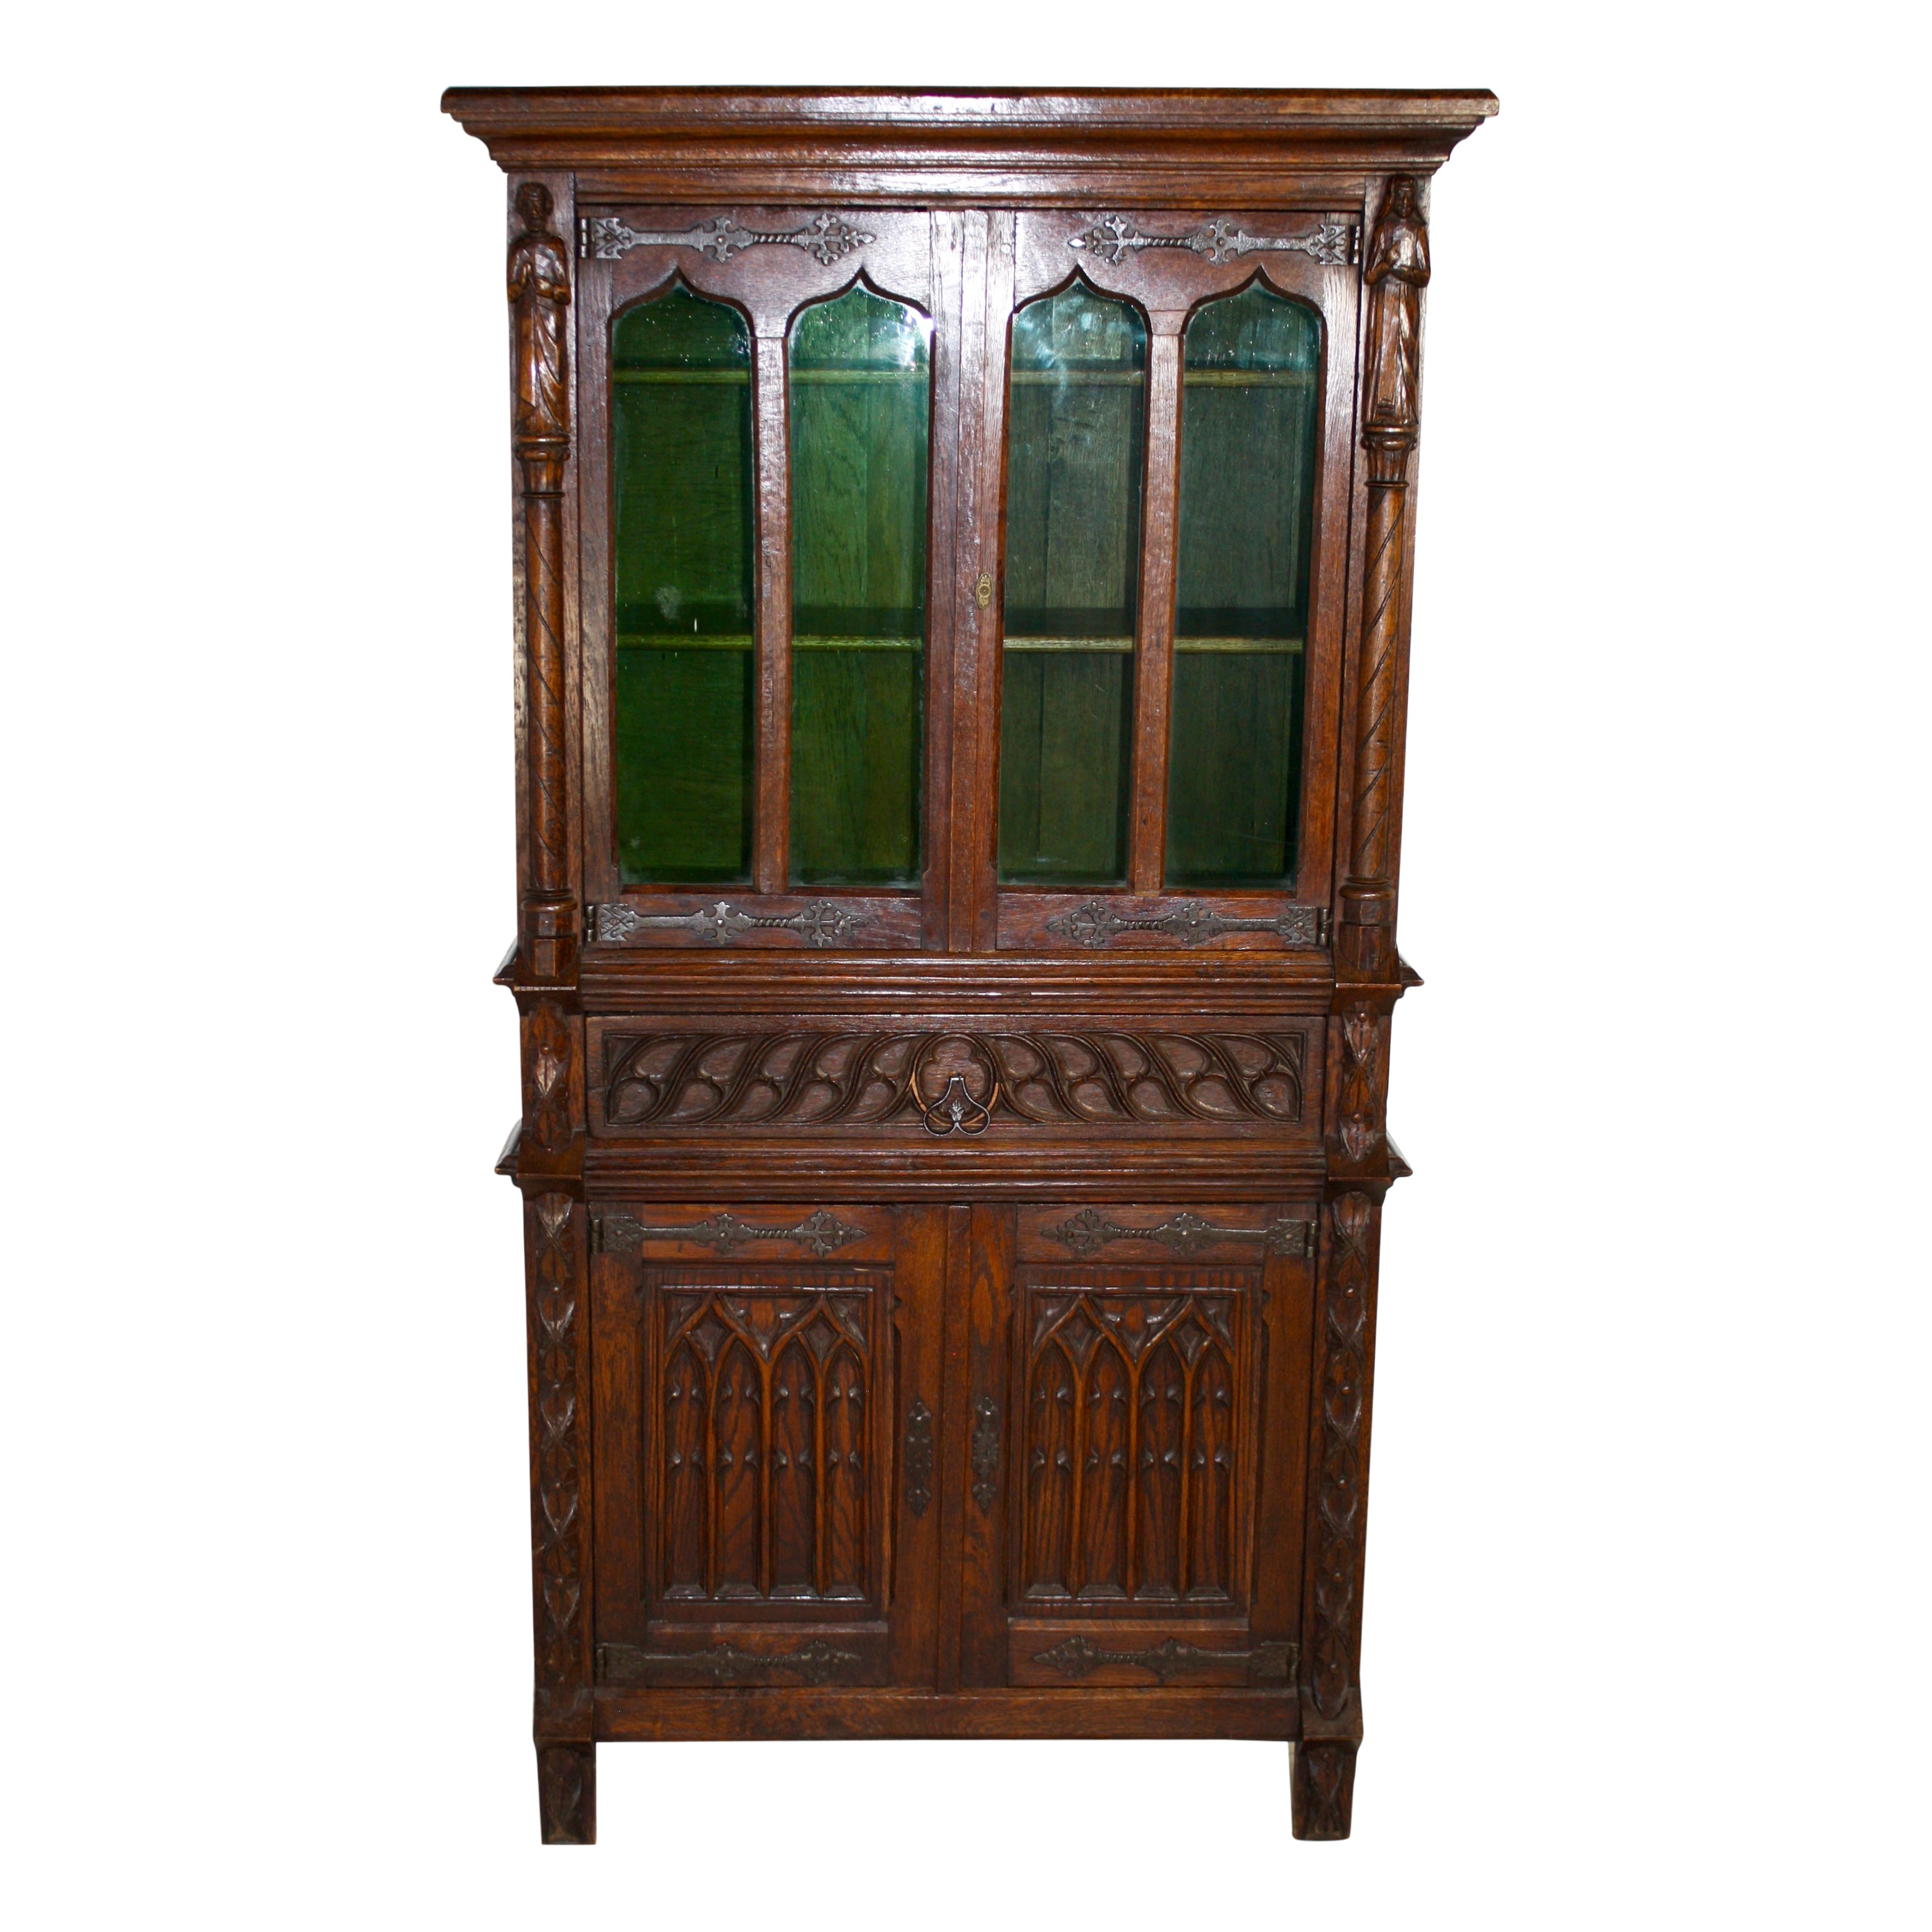 Gothic Revival Cabinet with Green Glass